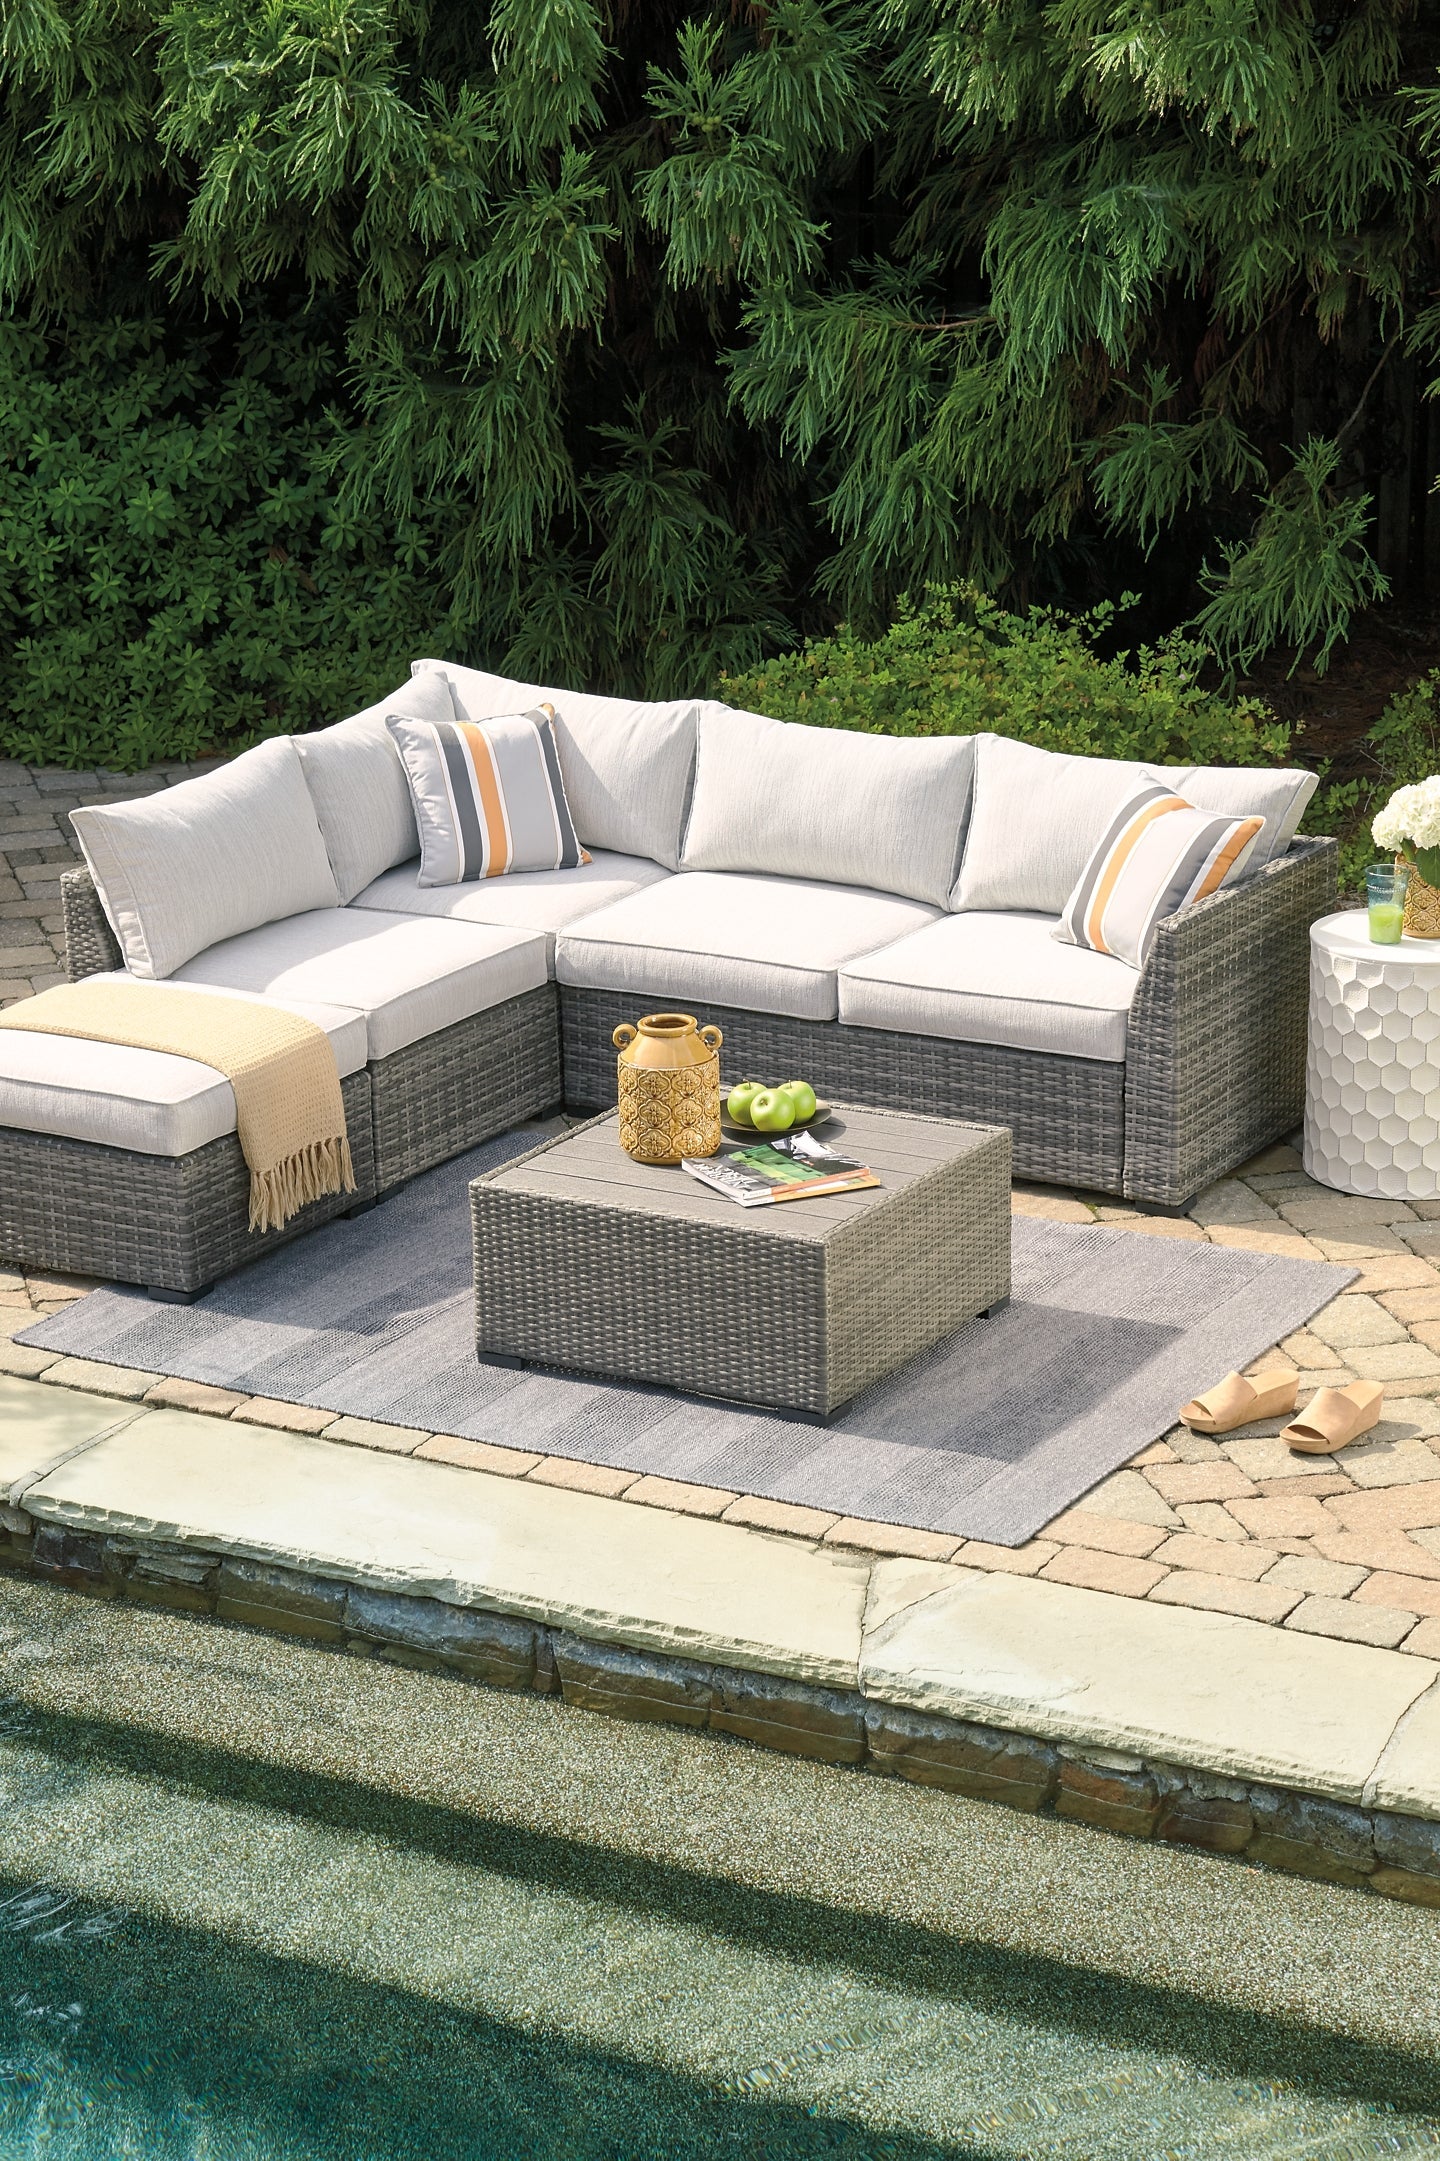 Cherry Point LoveseatSEC/OTTO/TBL Set(4/CN) at Walker Mattress and Furniture Locations in Cedar Park and Belton TX.